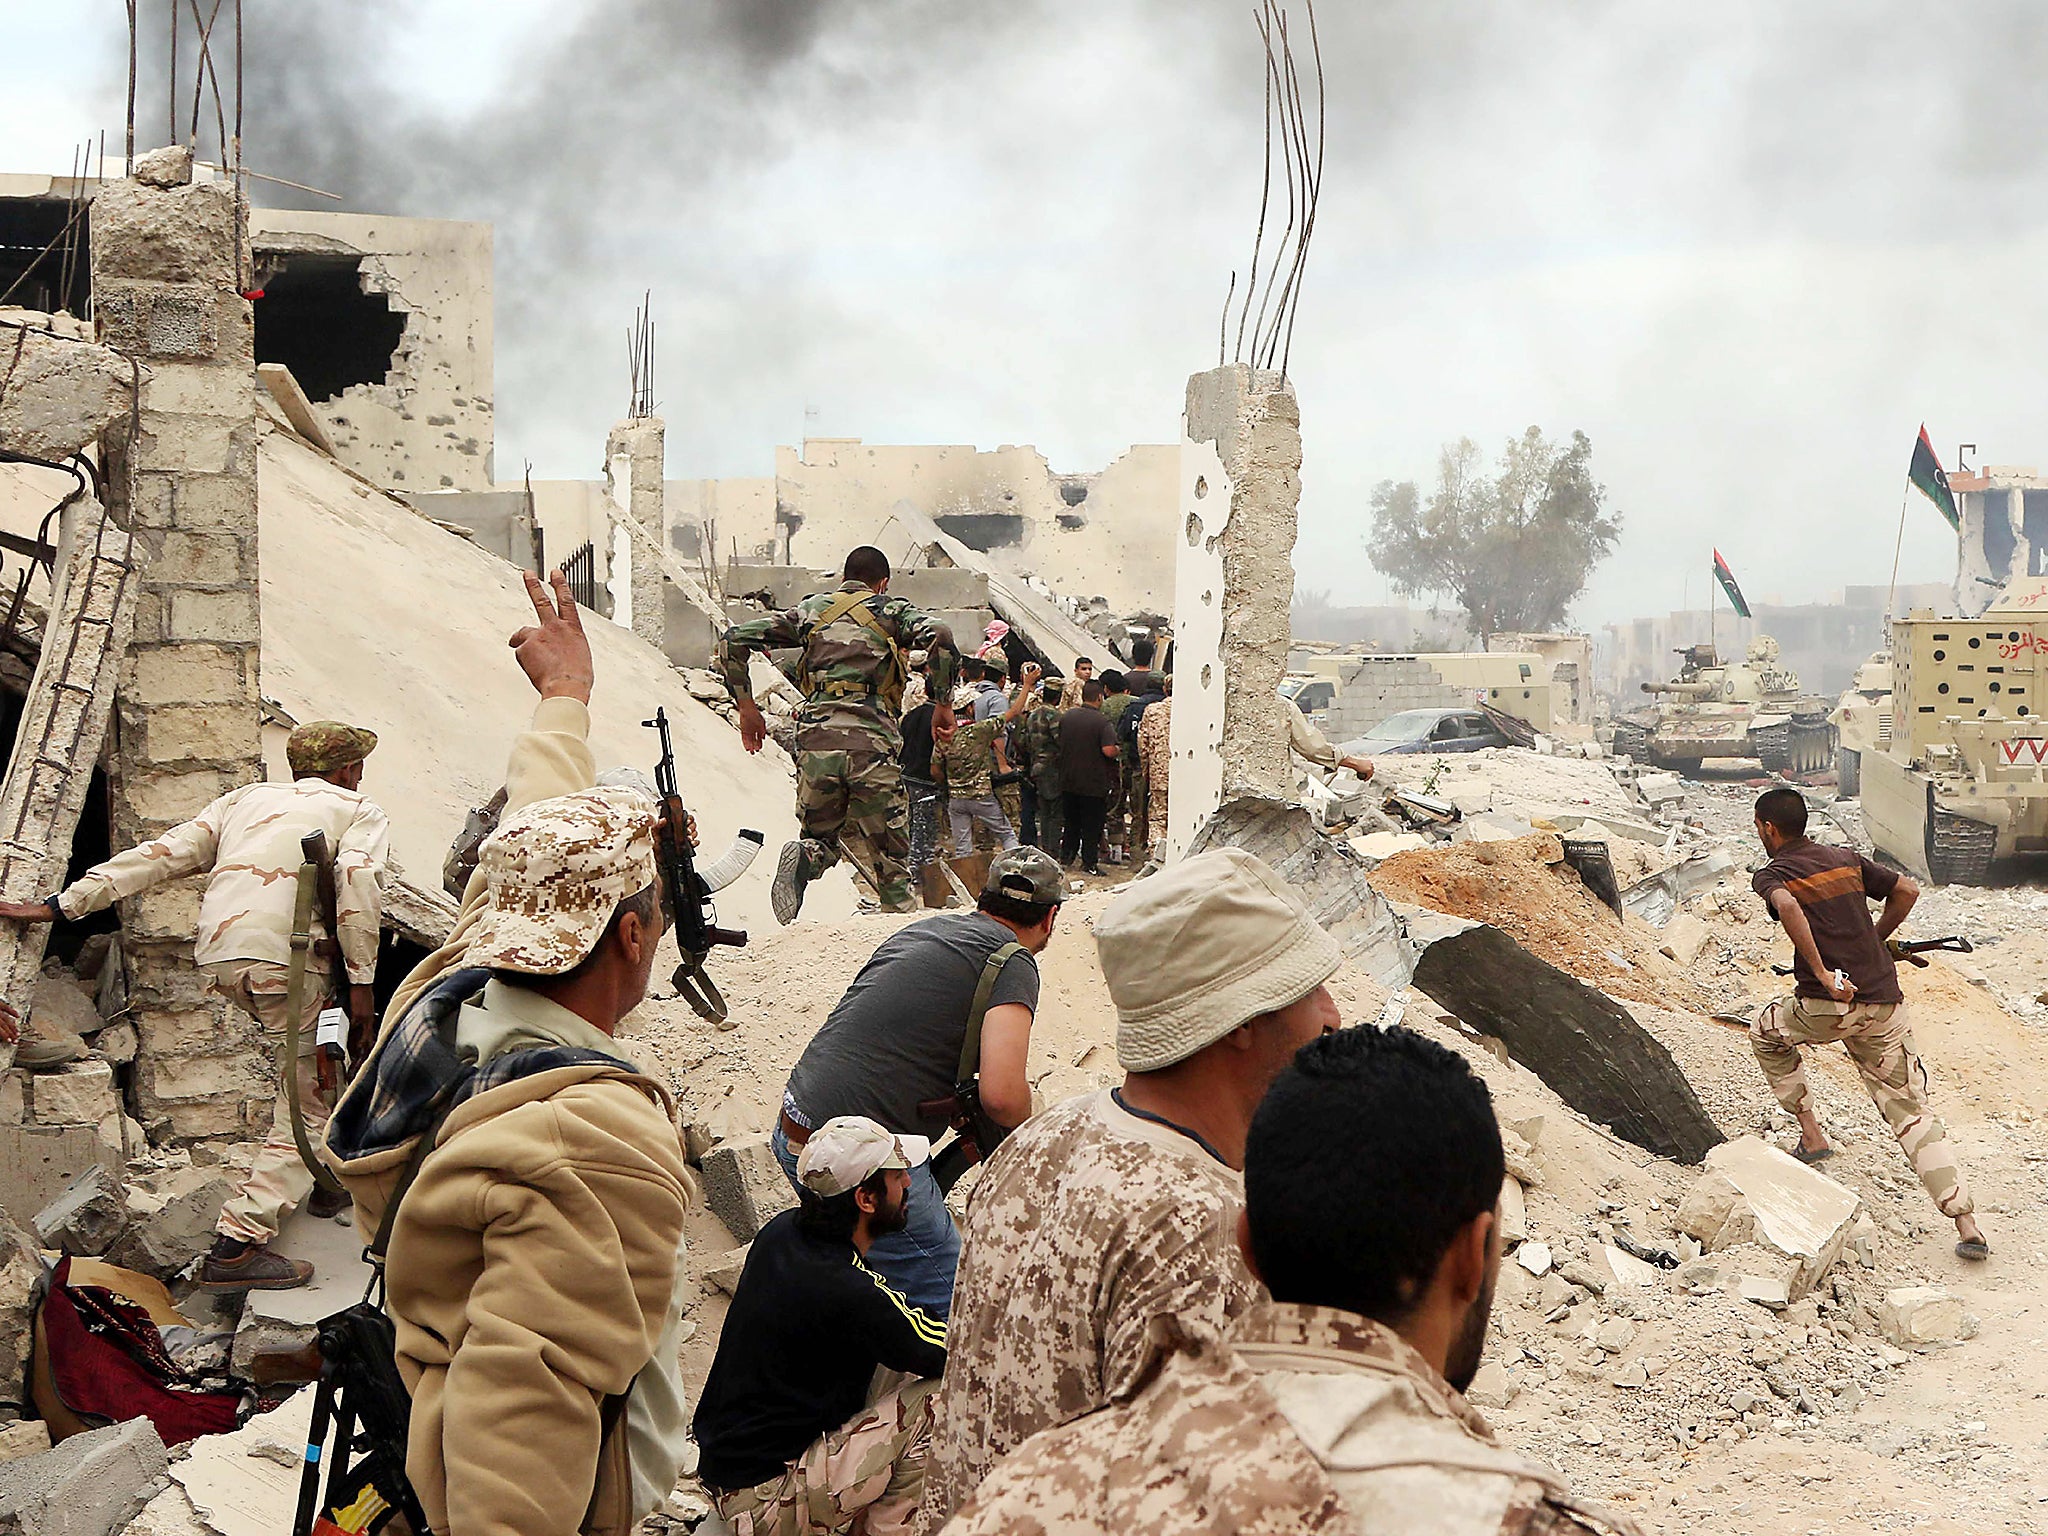 Forces loyal to Libya's Government of National Accord (GNA) hold a position amid the rubble of destroyed buildings in Sirte's Al-Giza Al-Bahriya district